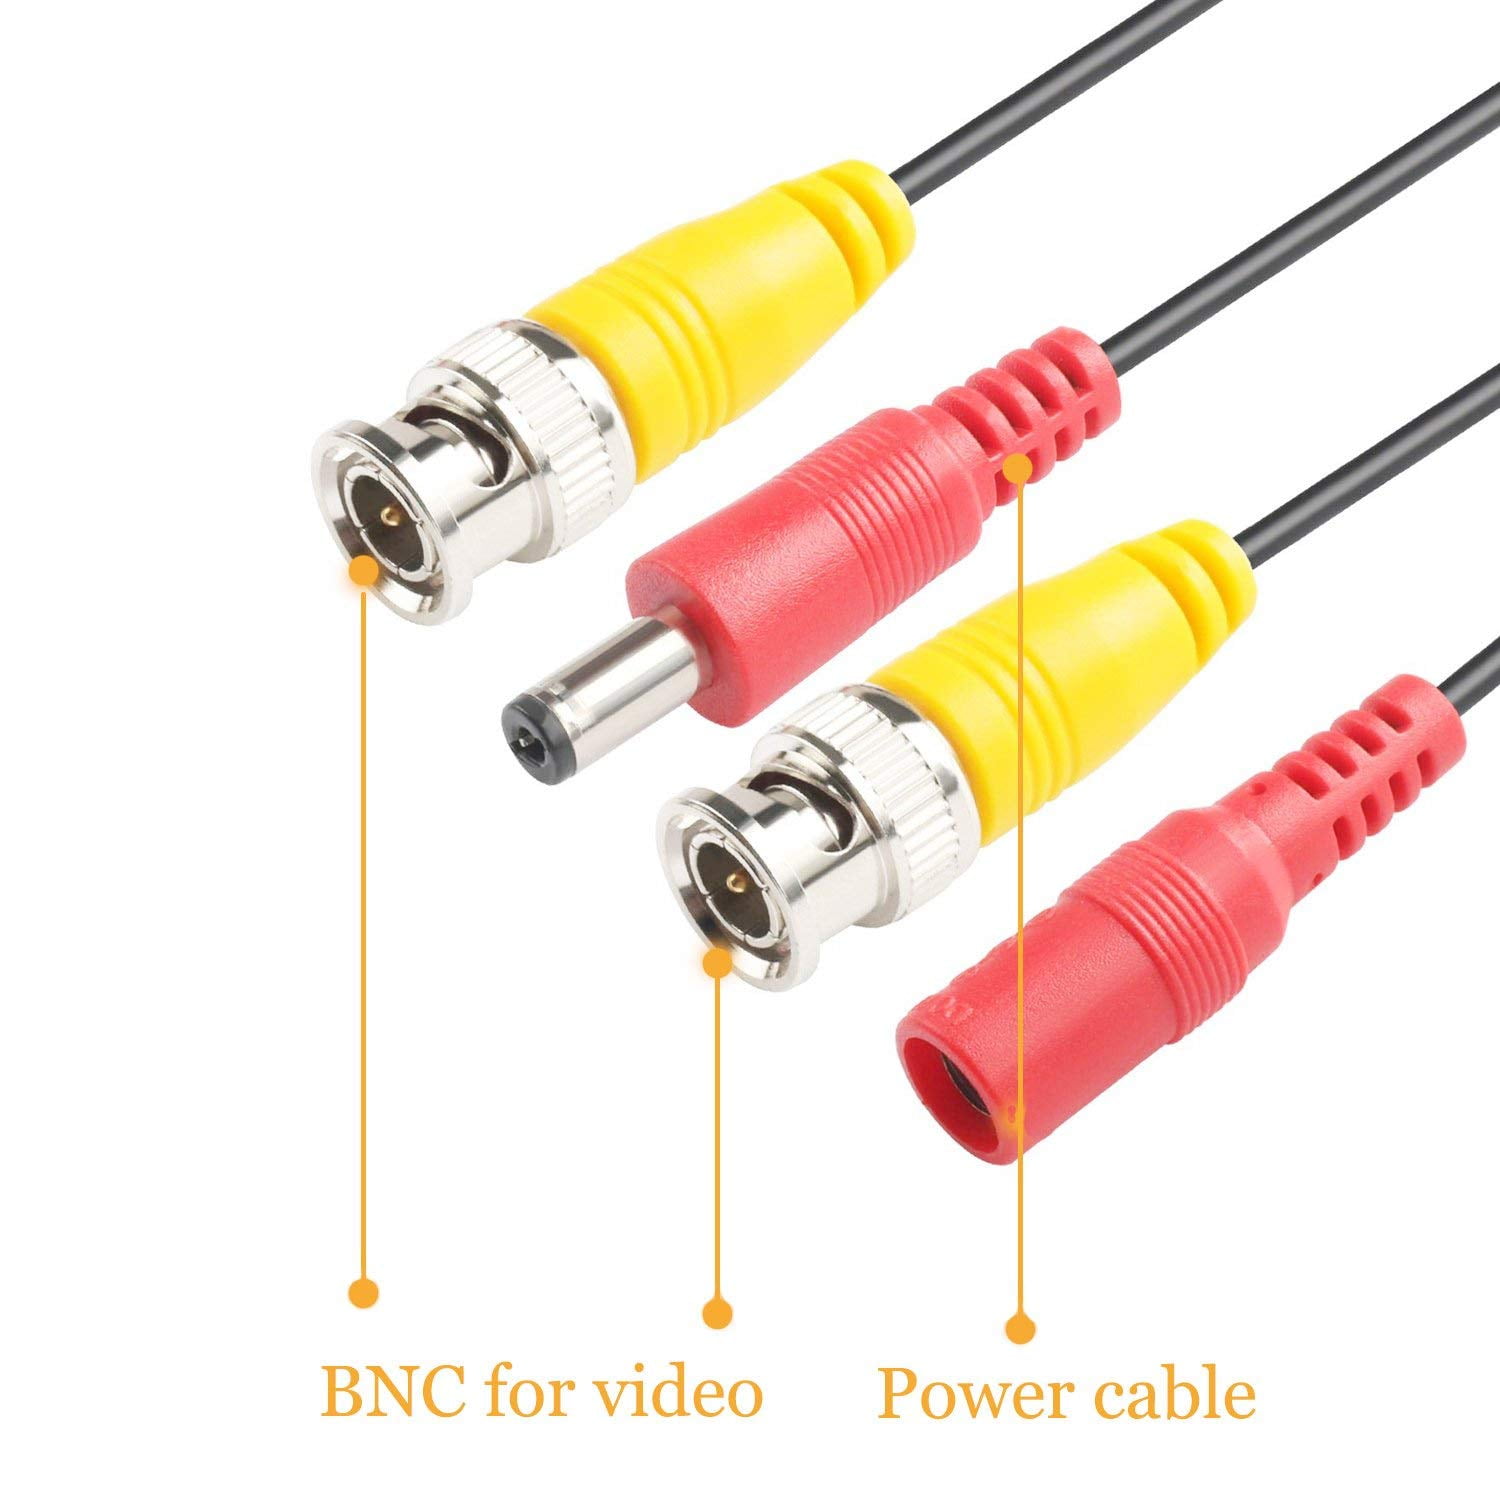 10m 33ft BNC Video Power Siamese Cable Wire Cord for CCTV Security Camera DVR 